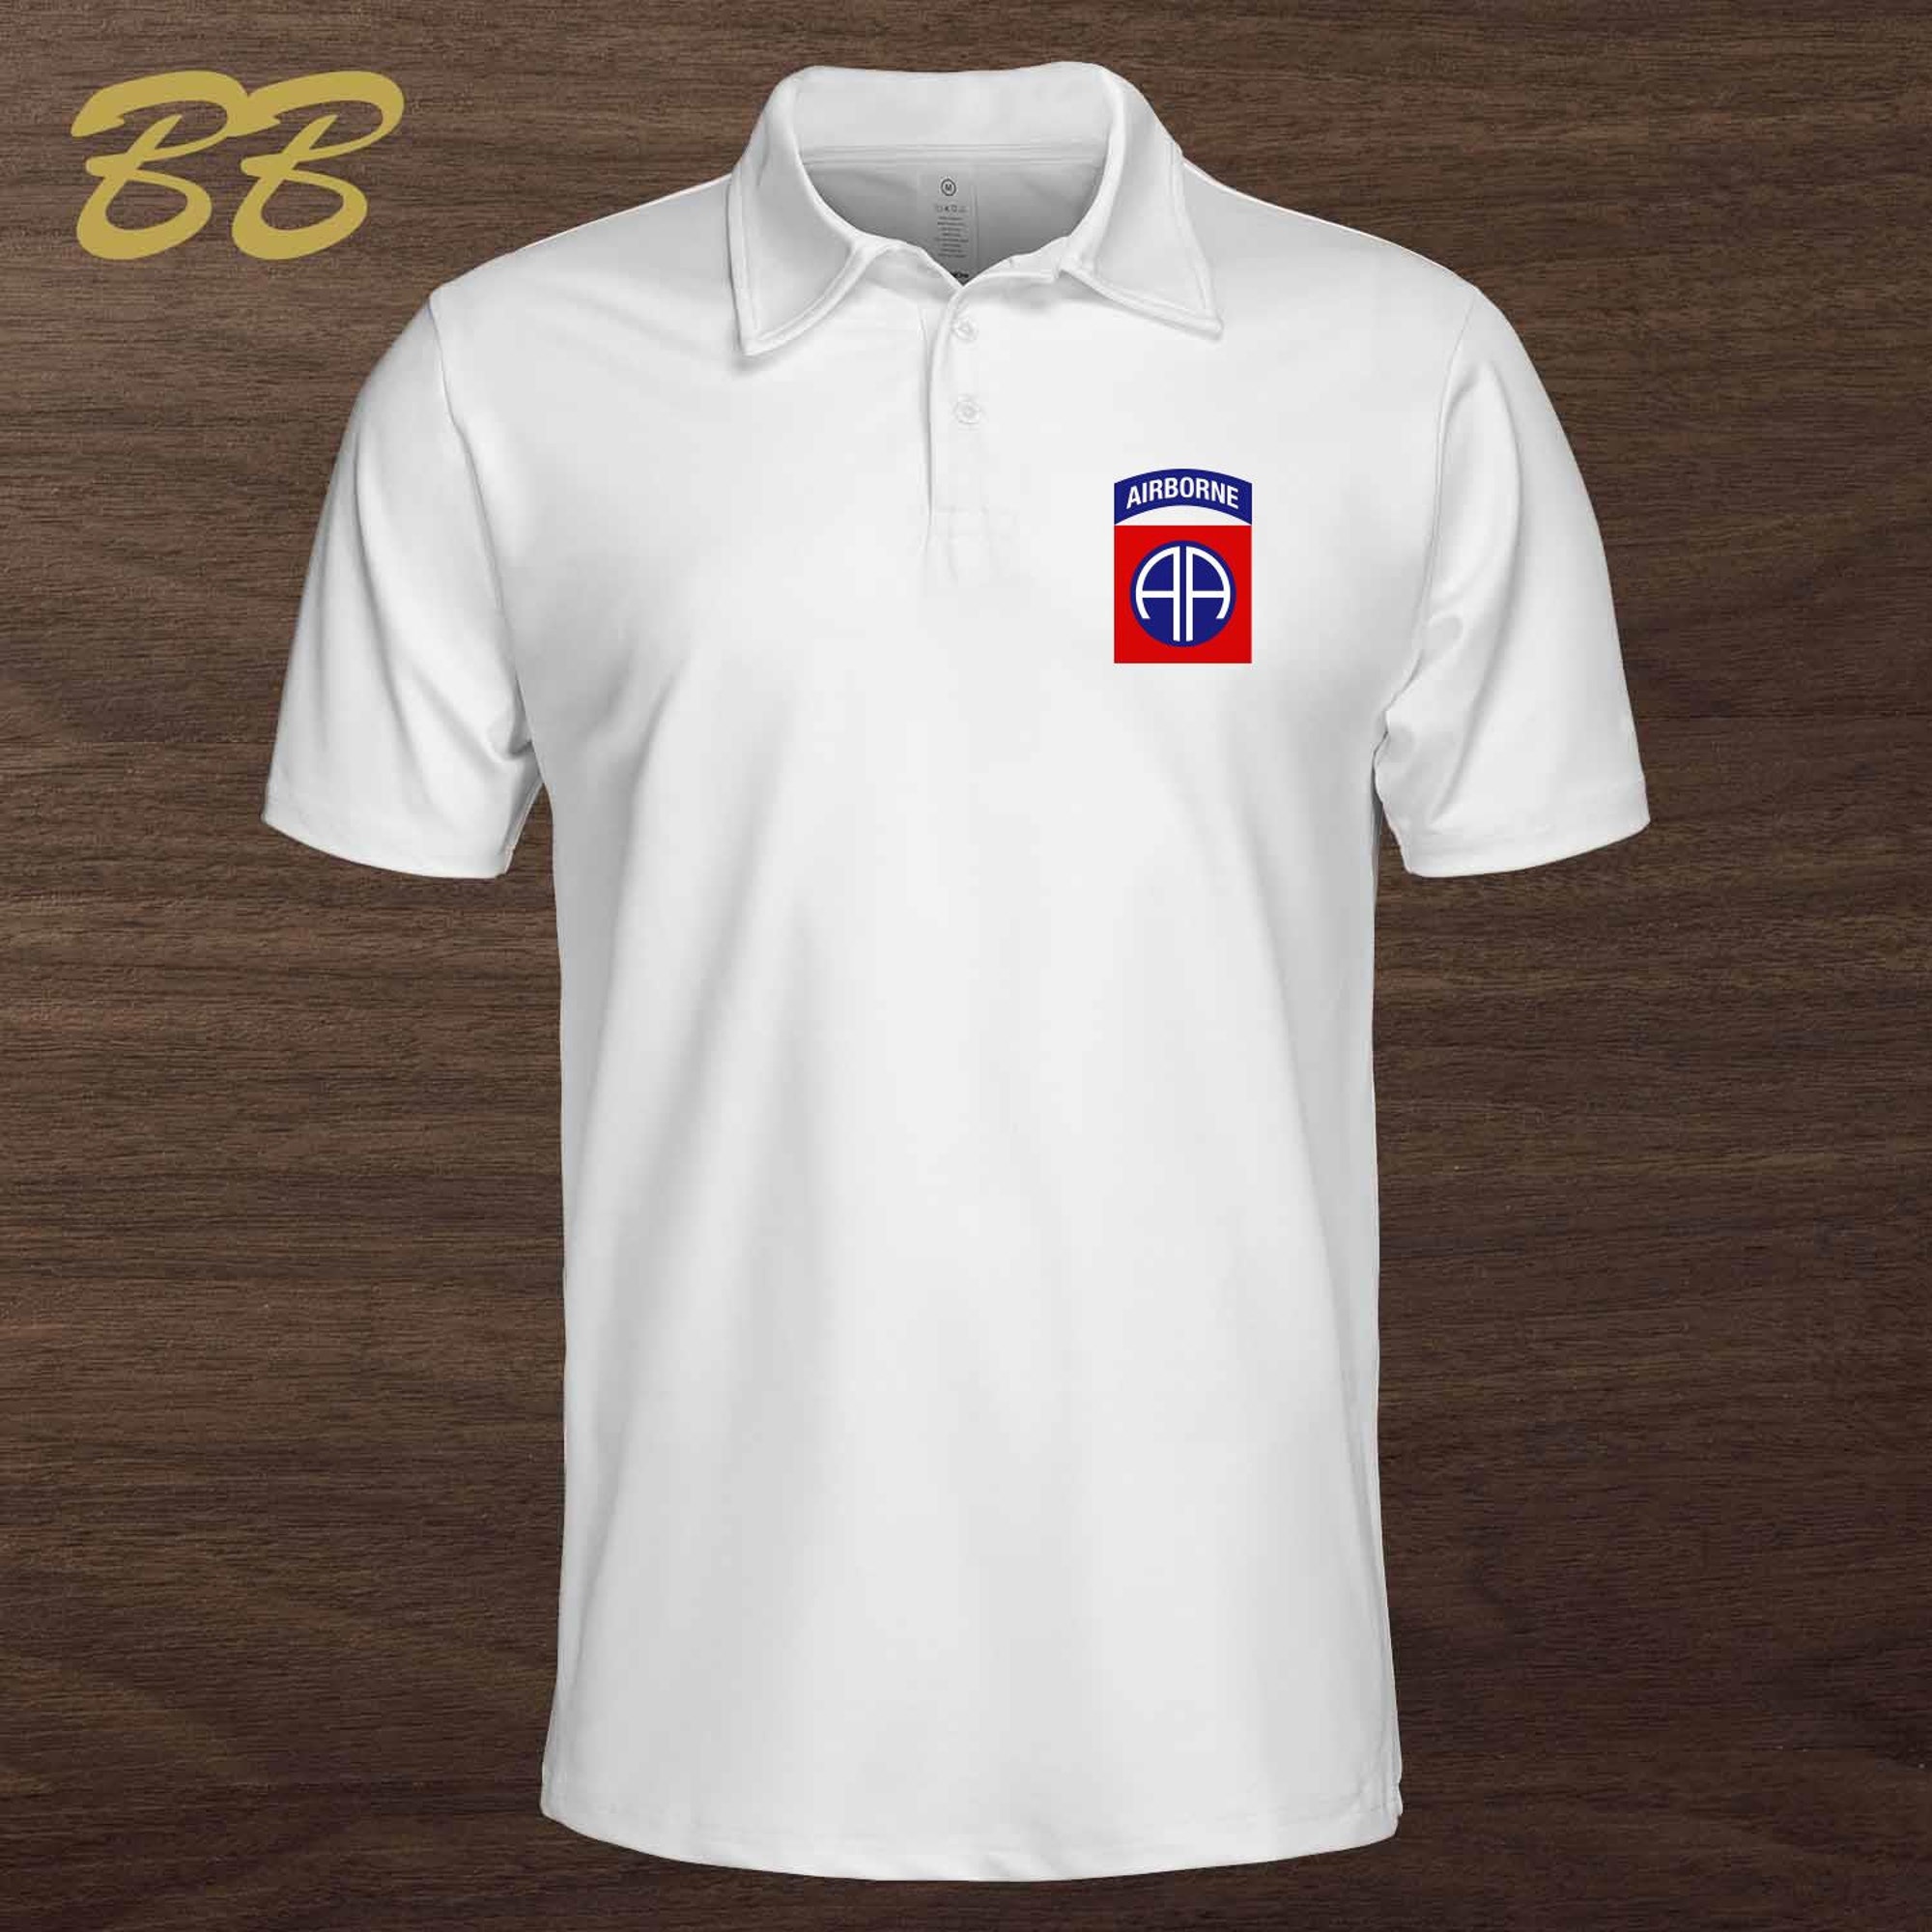 Discover 82nd Airborne Army Polo Shirt